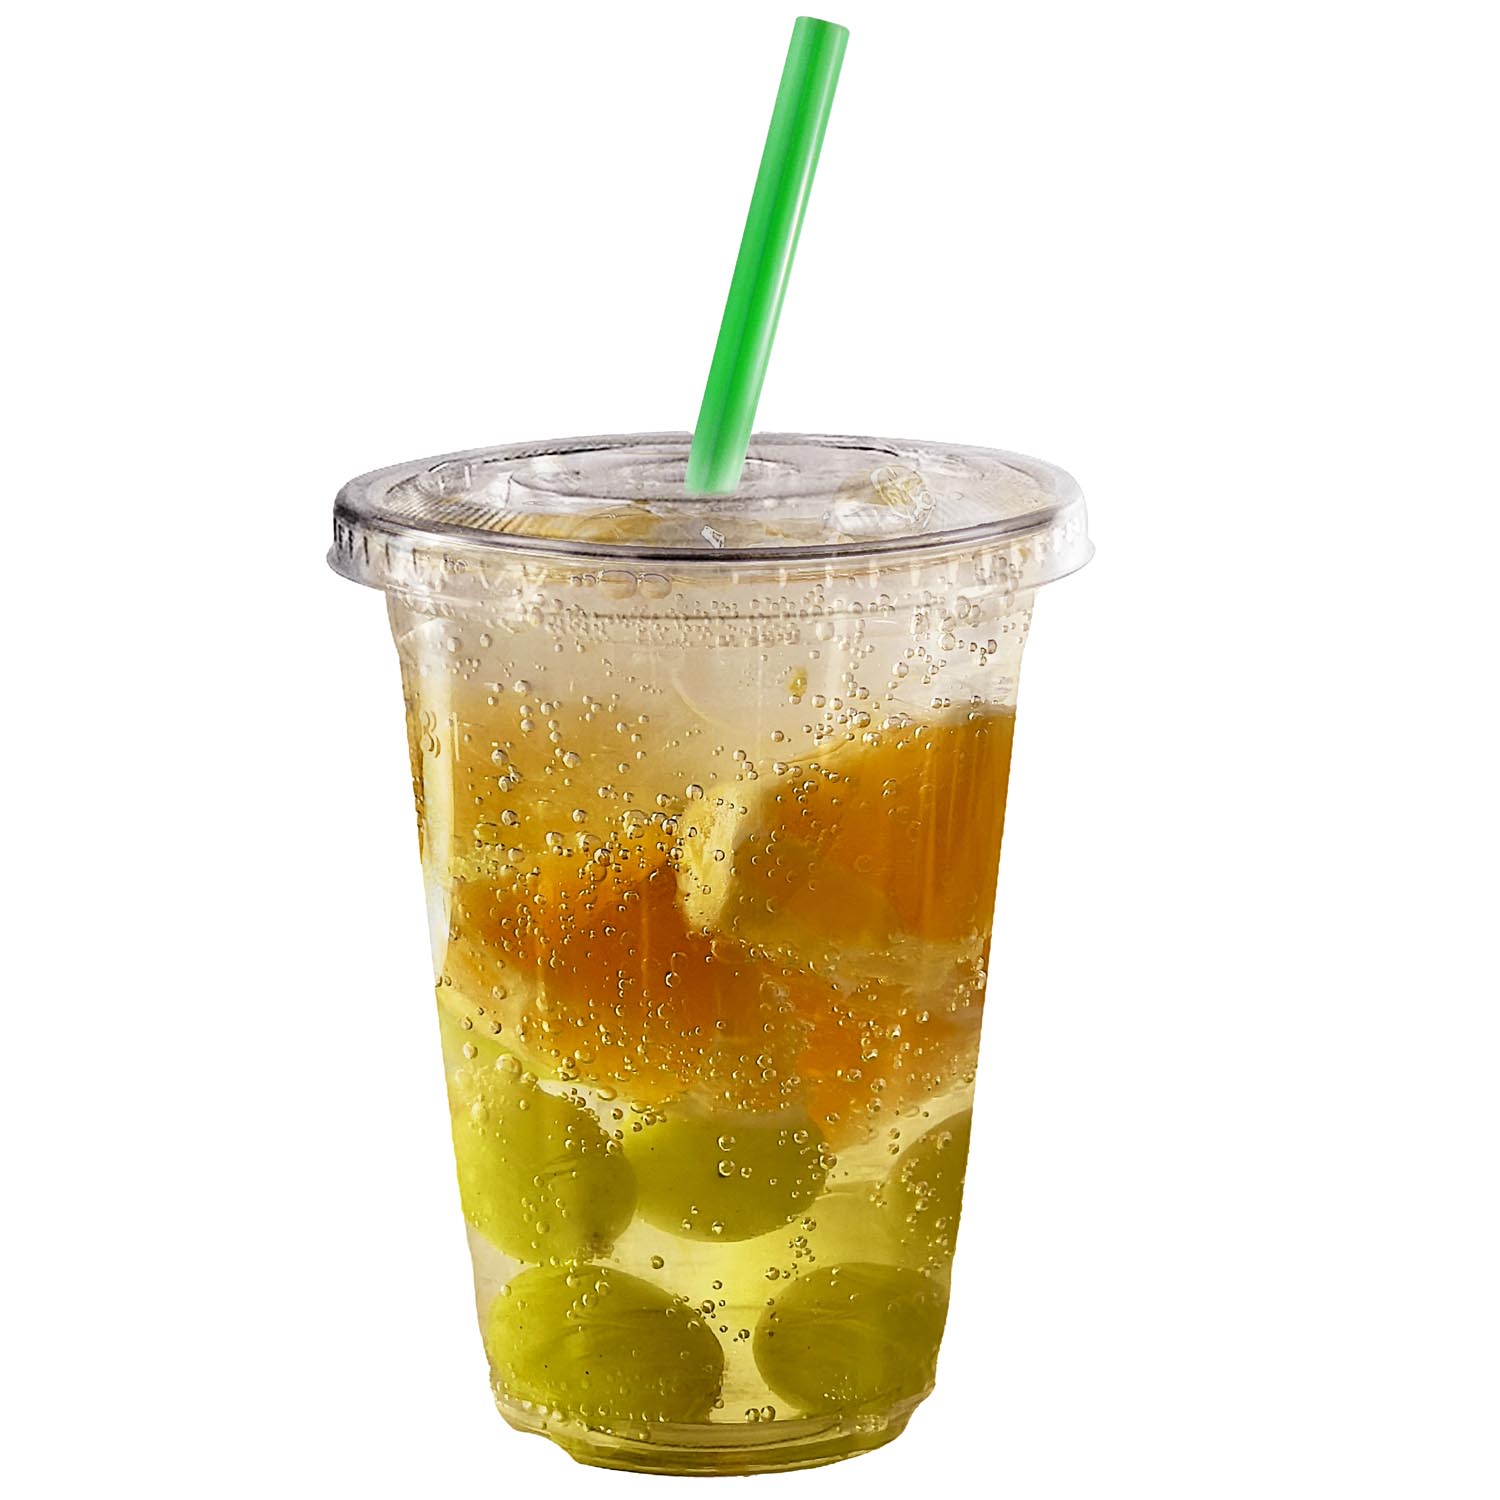 20oz Disposable Pet Clear Plastic Smoothie Cups with Clear Flat Lids and Color Straws